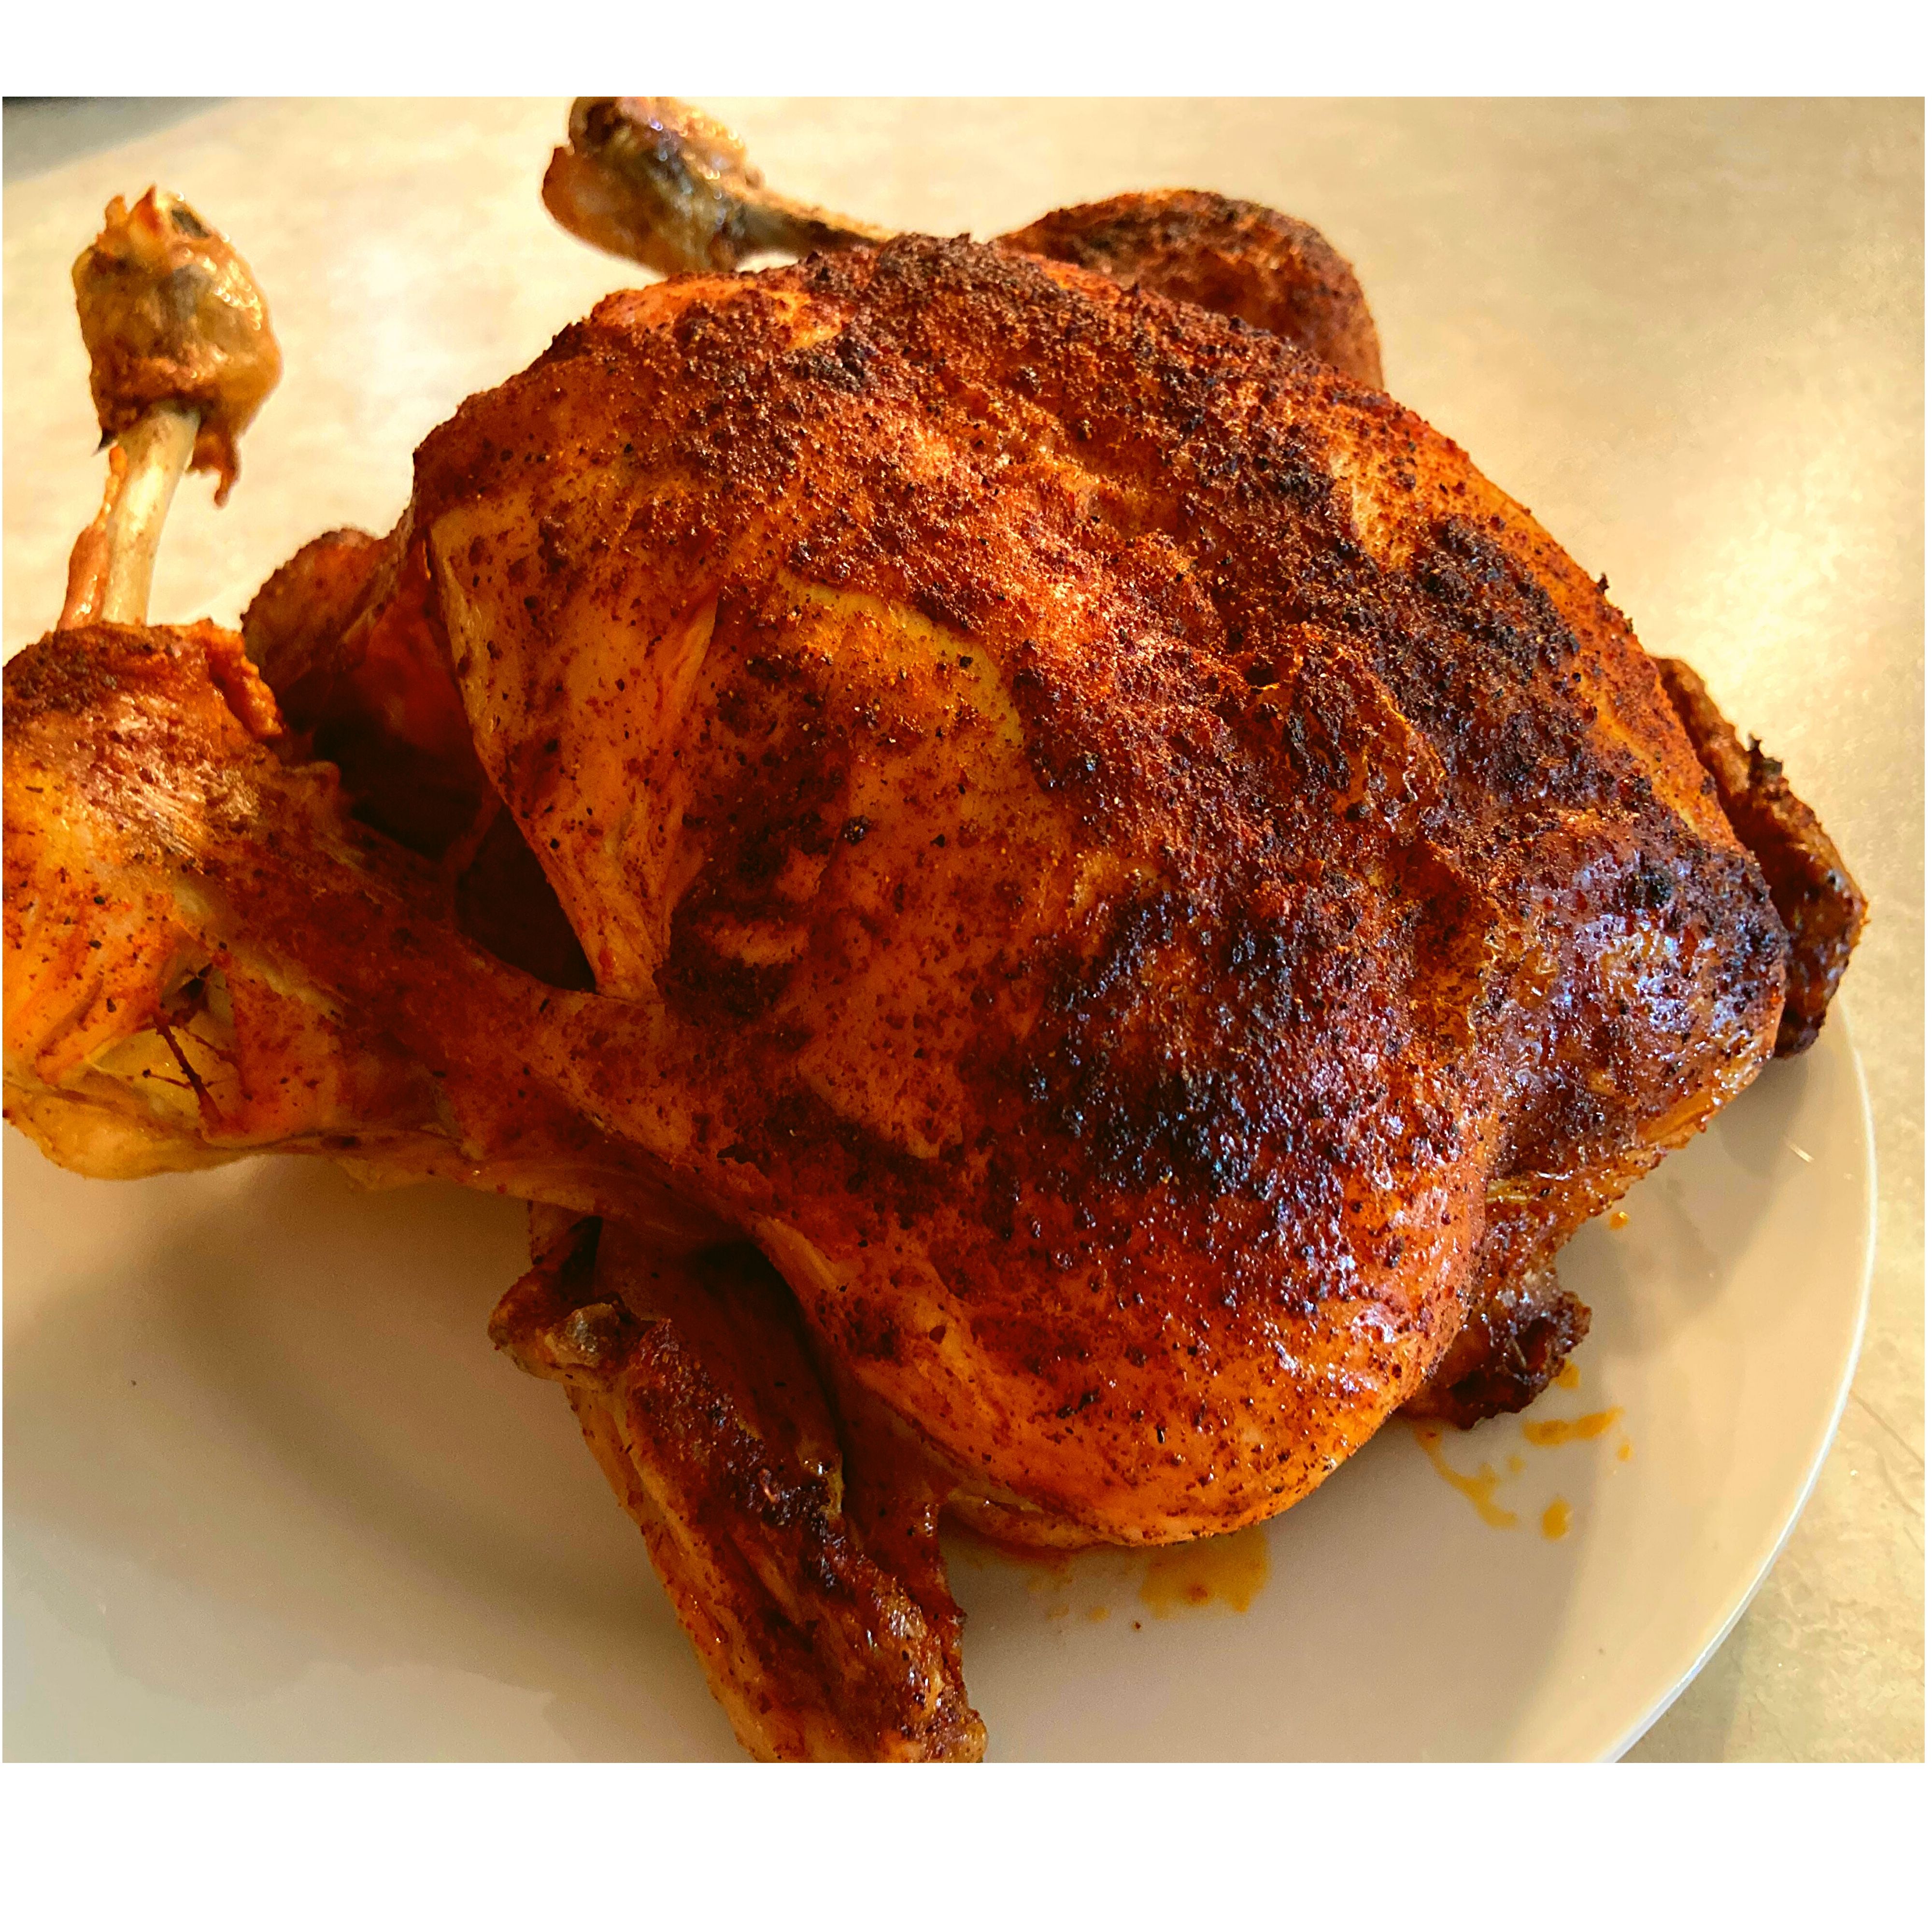 A whole chicken with crispy browned skin sitting on a white plate on a kitchen counter.